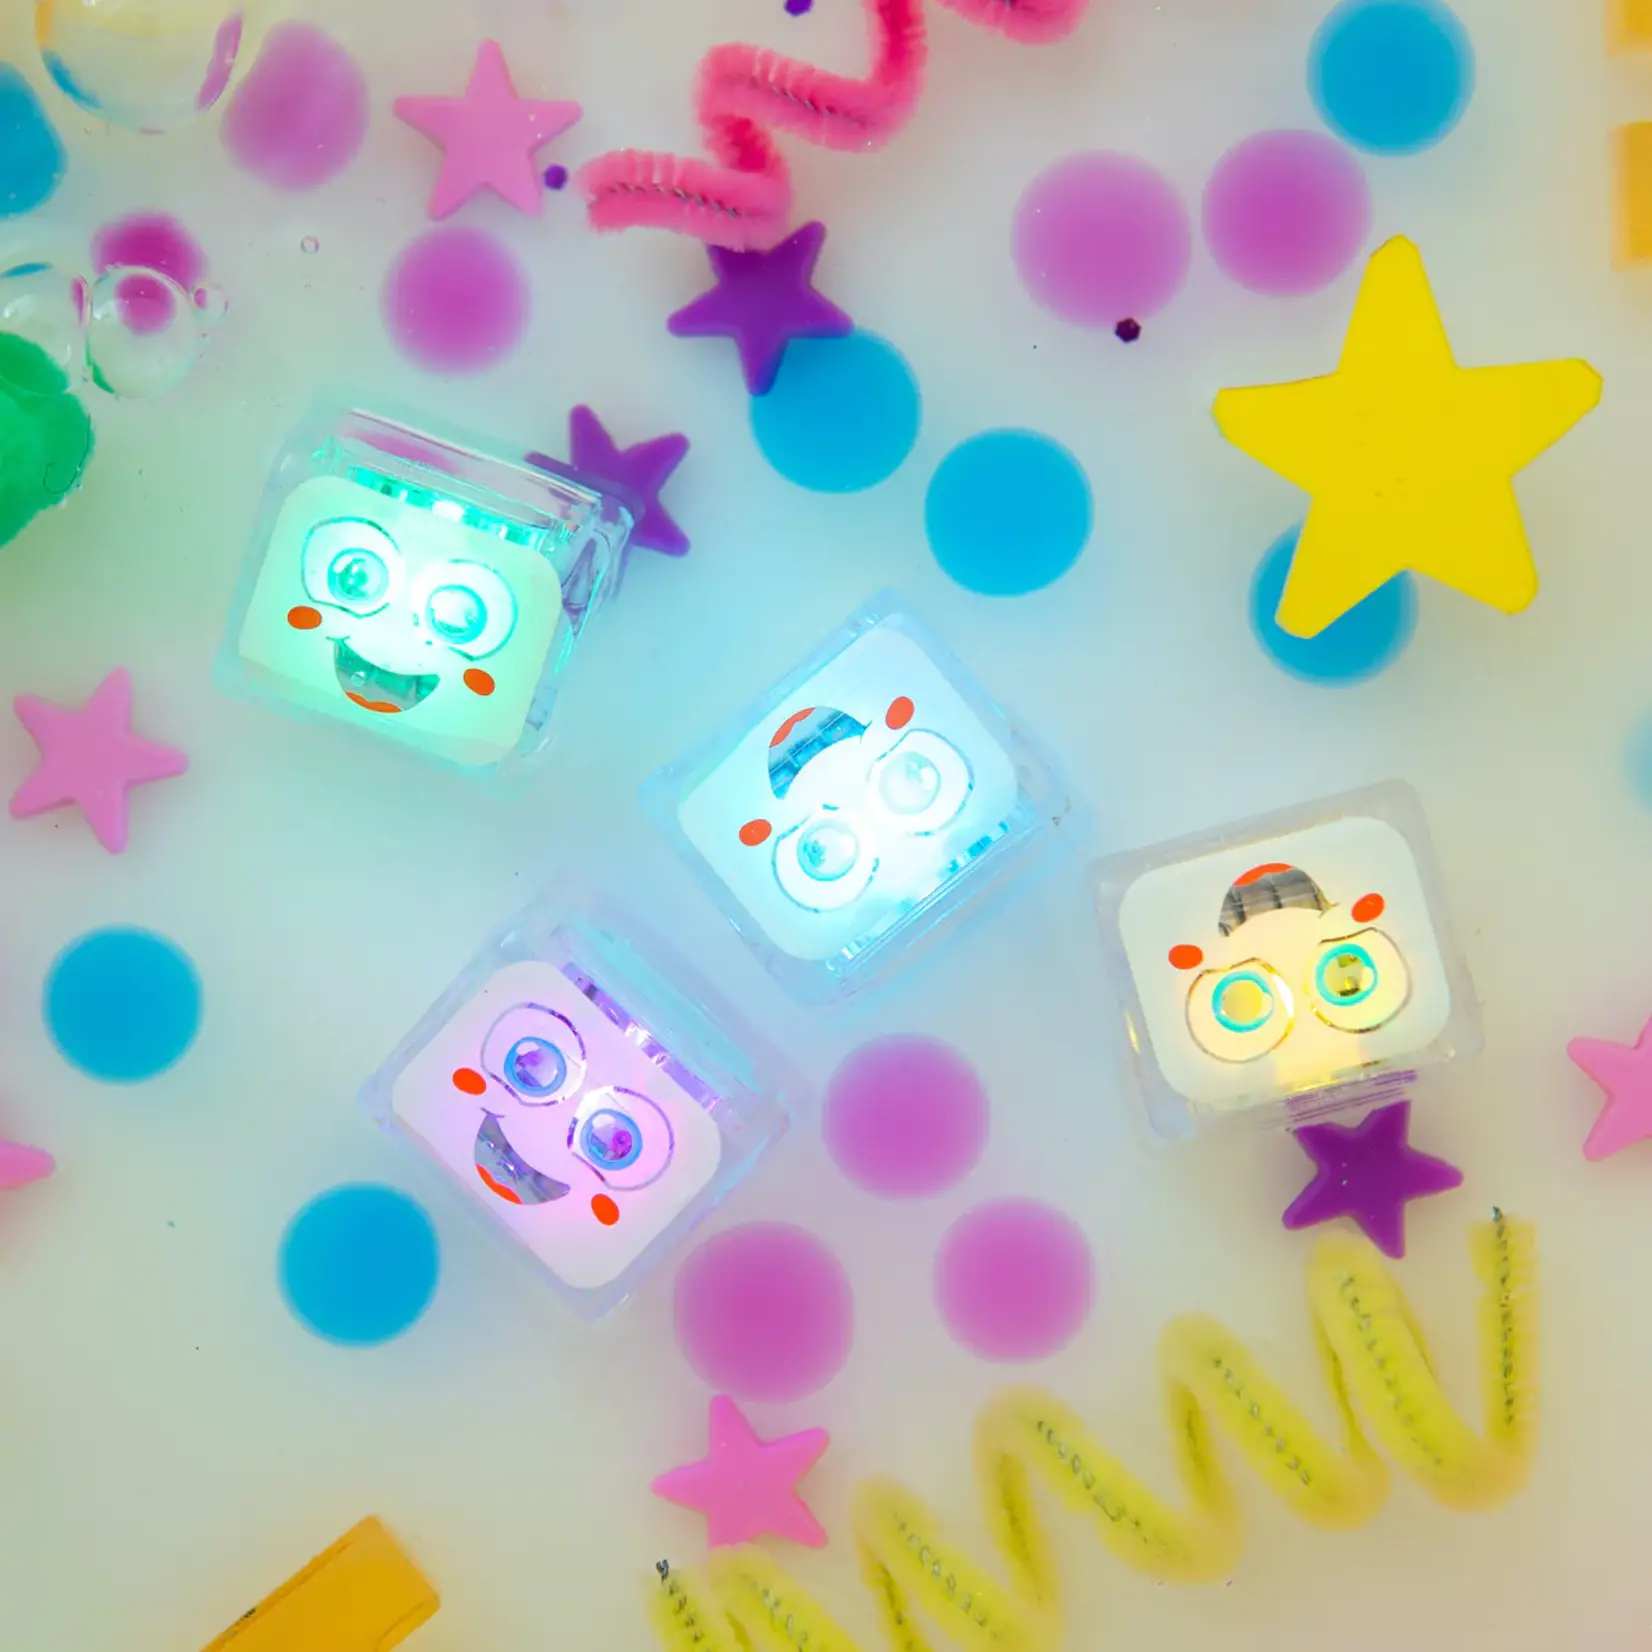 Glo Pals GLO PALS NEW LIGHT UP CUBES 4-PACK